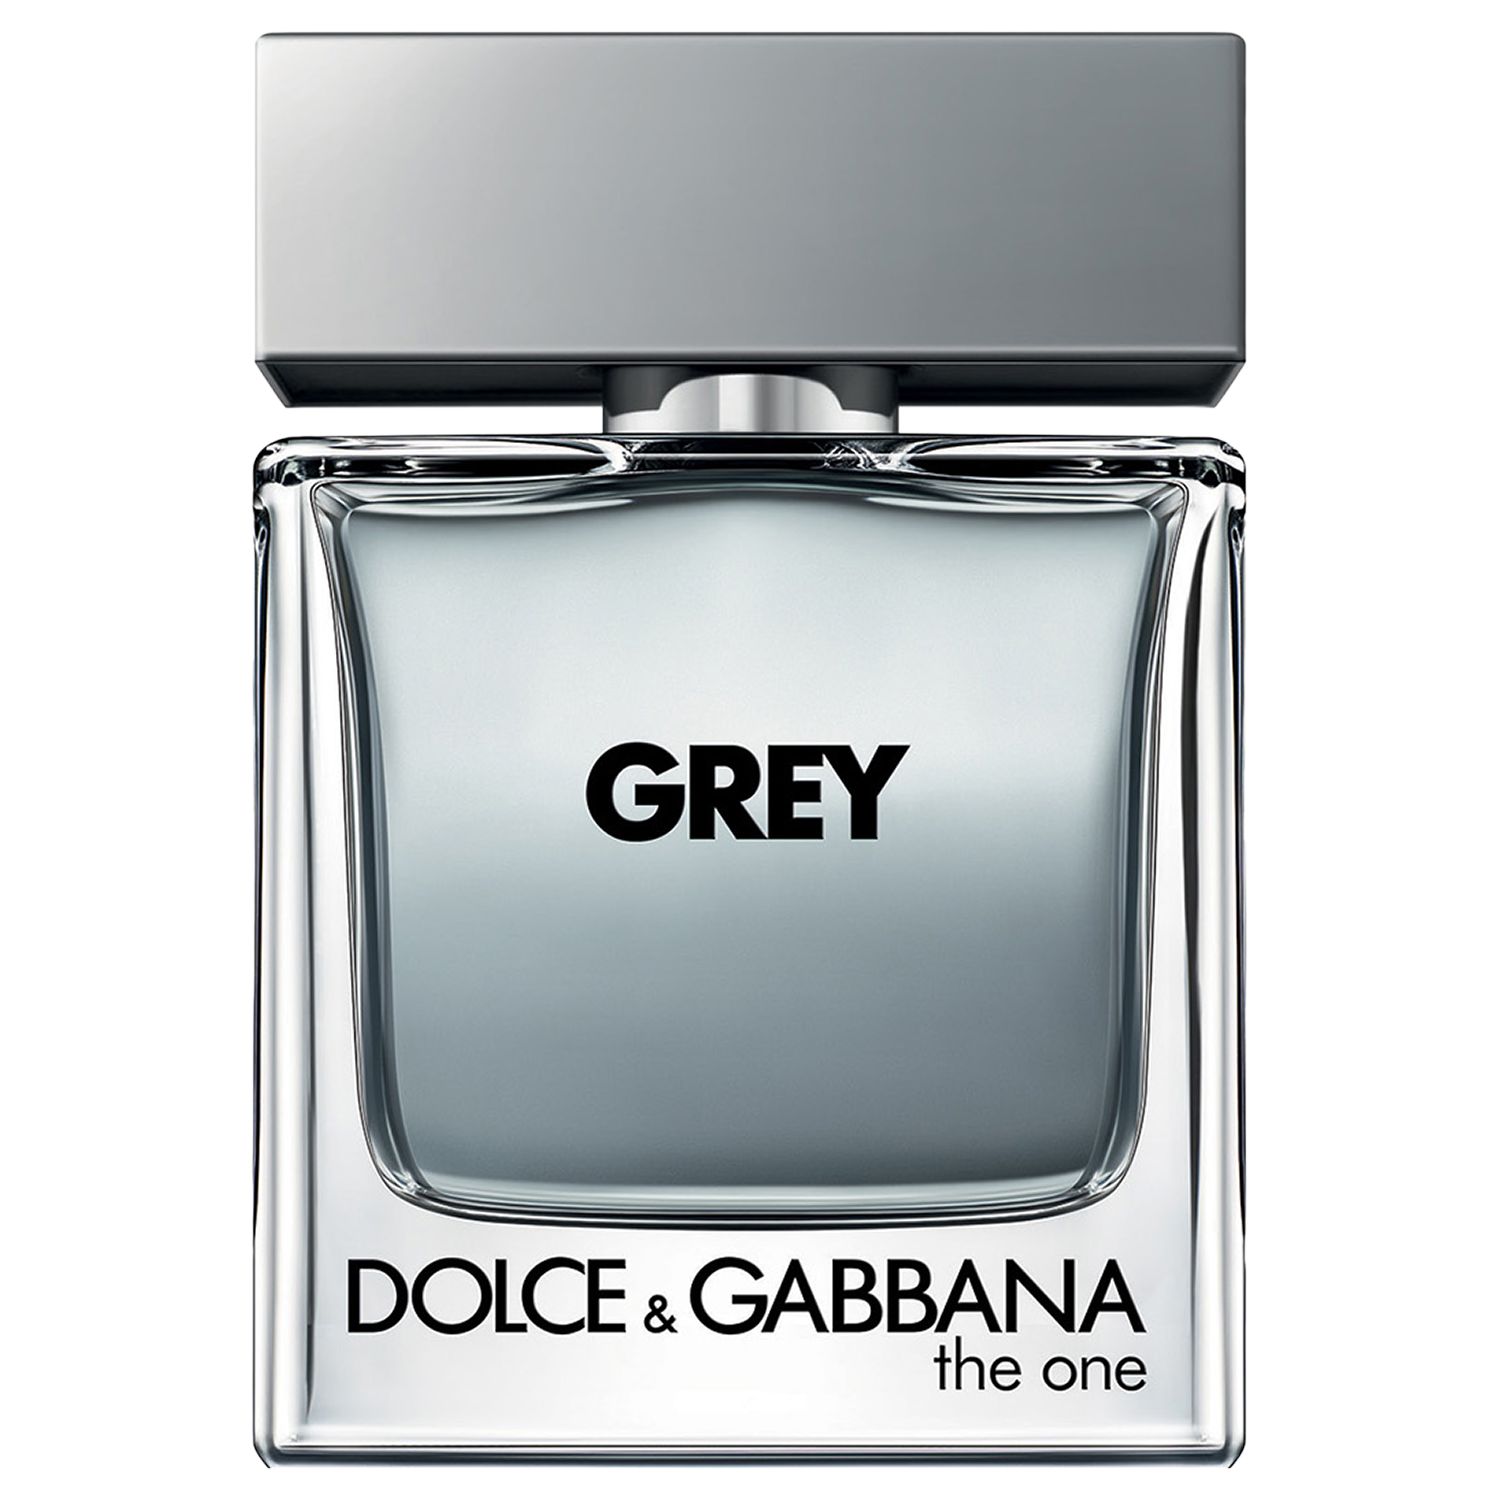 dolce gabbana grey review